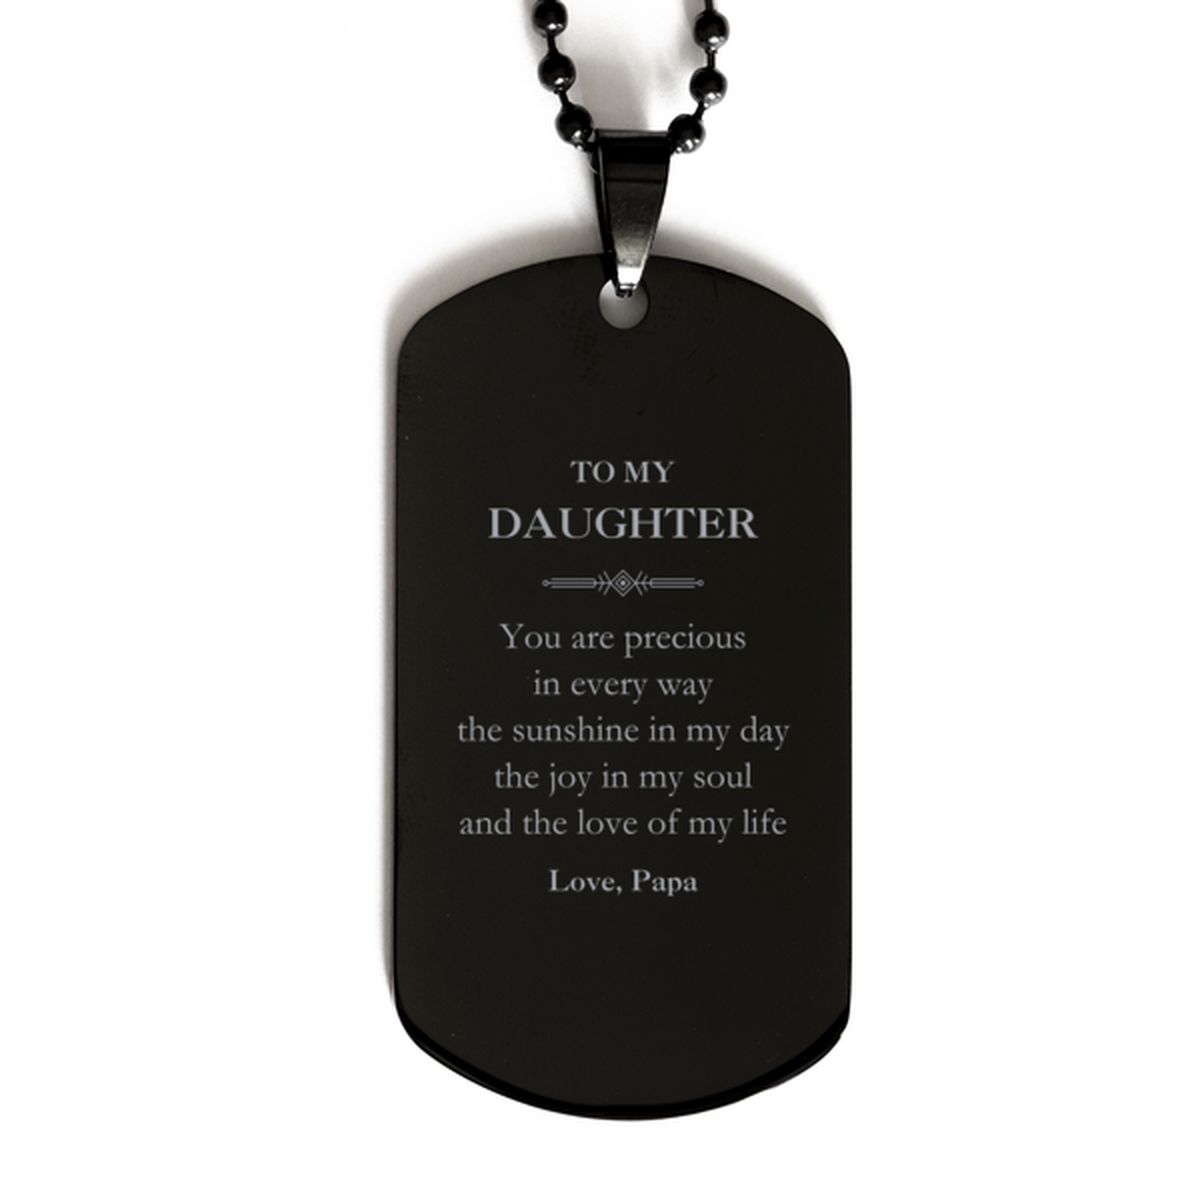 Graduation Gifts for Daughter Black Dog Tag Present from Papa, Christmas Daughter Birthday Gifts Daughter You are precious in every way the sunshine in my day. Love, Papa